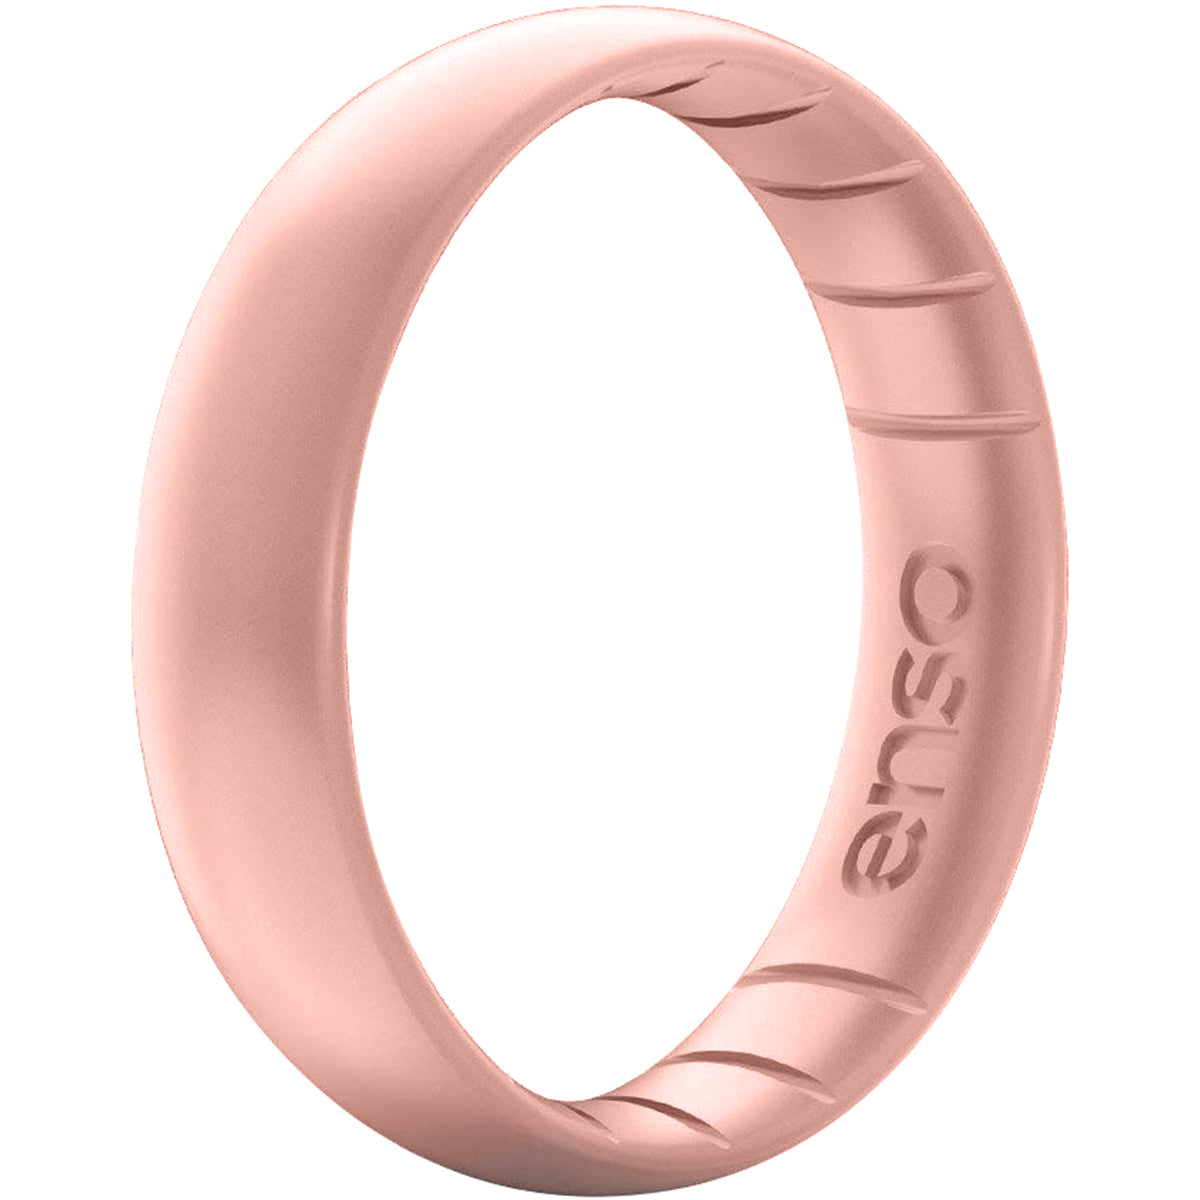 Enso Rings Thin Elements Series Silicone Ring - Rose Gold Enso Rings